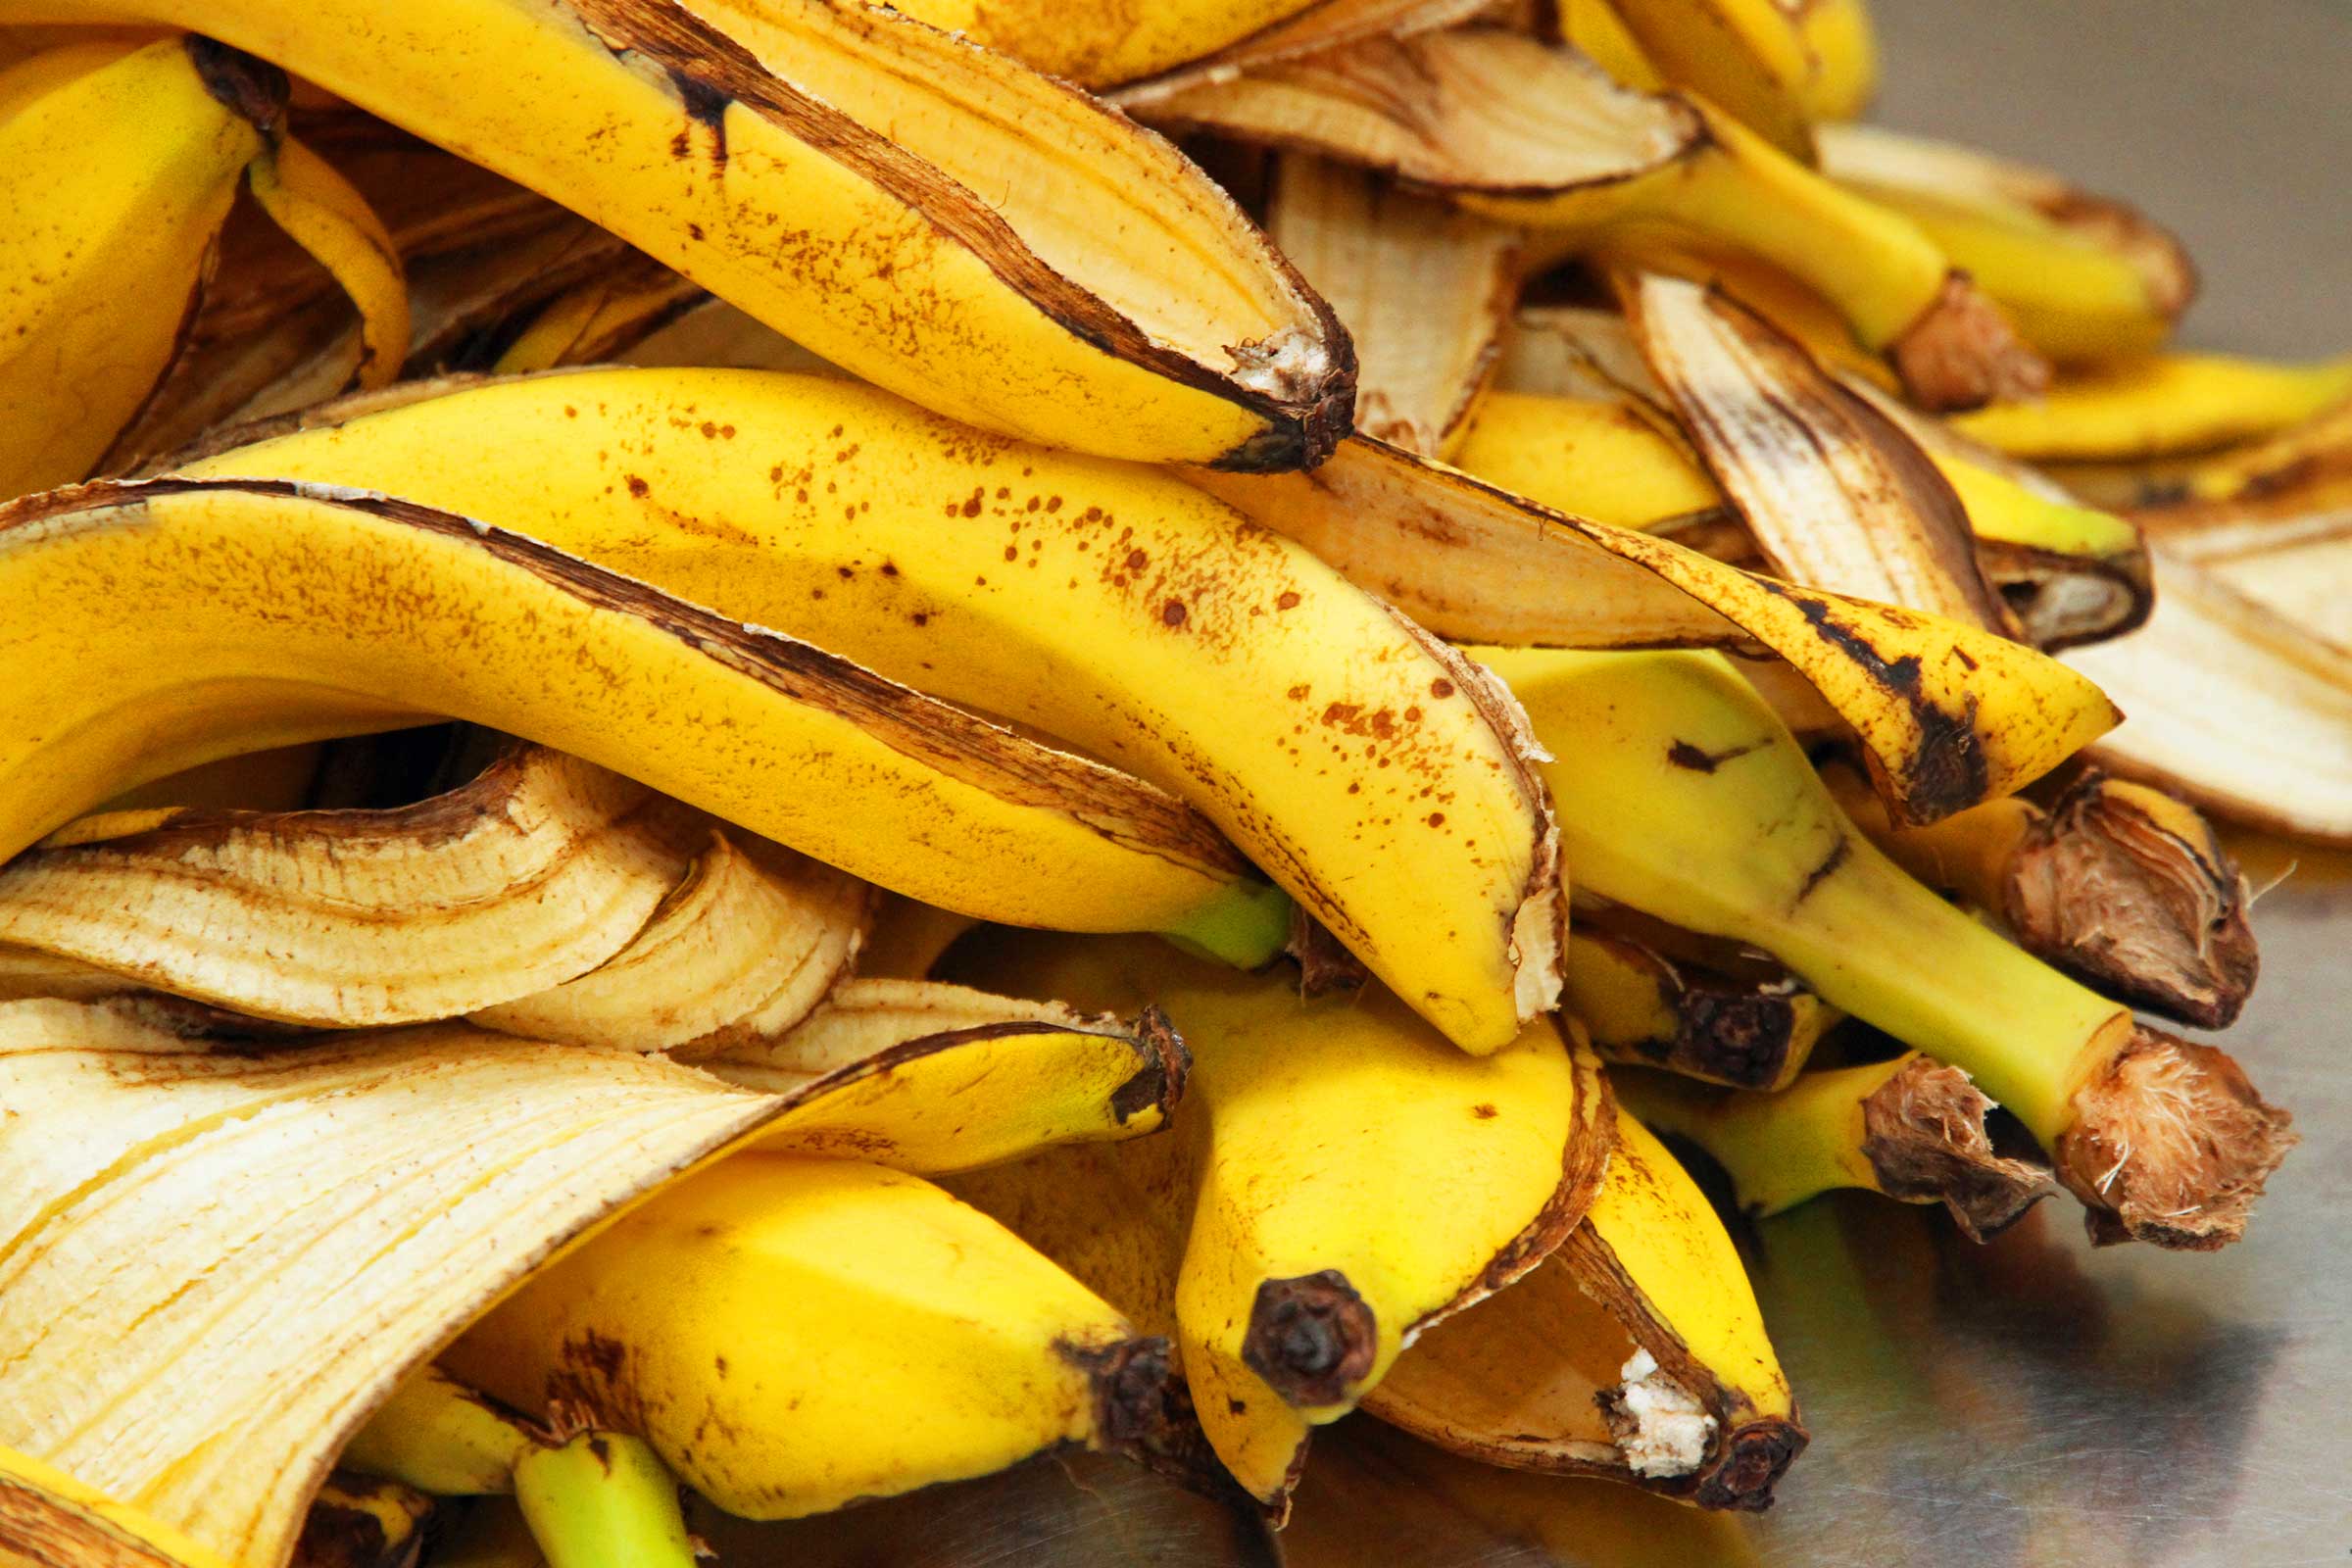 Surprising Uses for Bananas | Reader's Digest